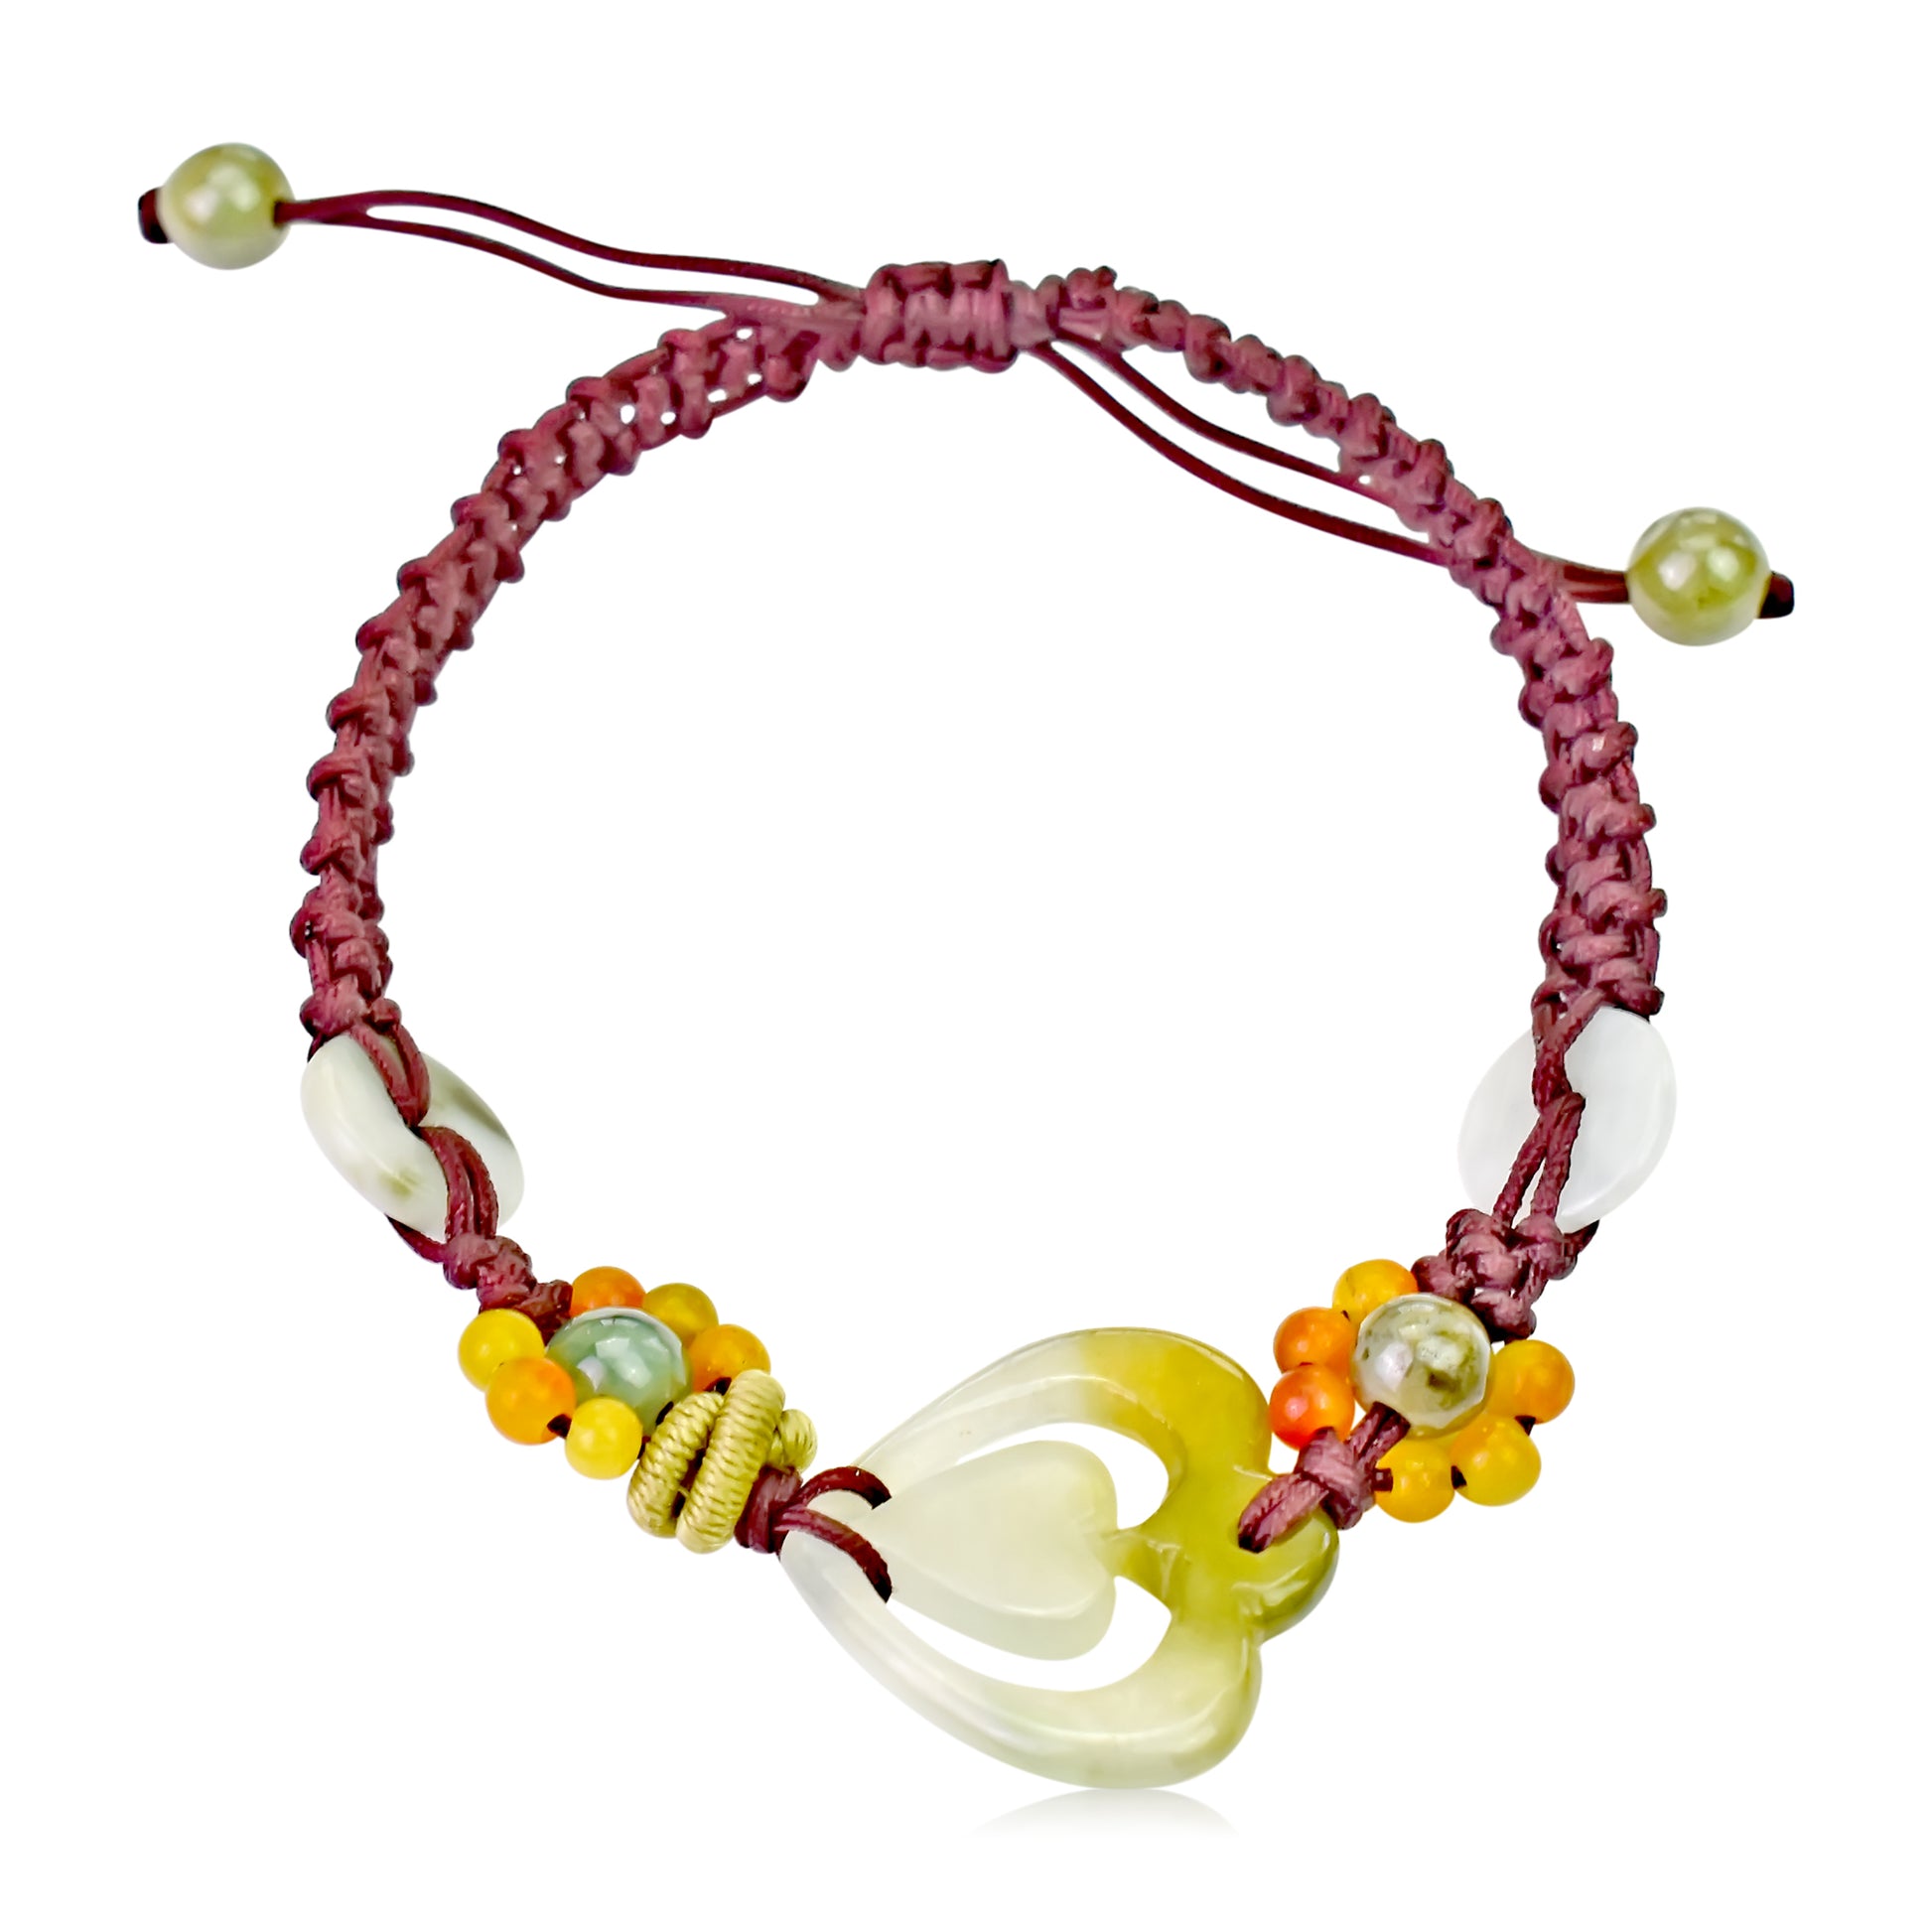 Get Ready for Love with the Heart Honey Jade Bracelet made with Brown Cord